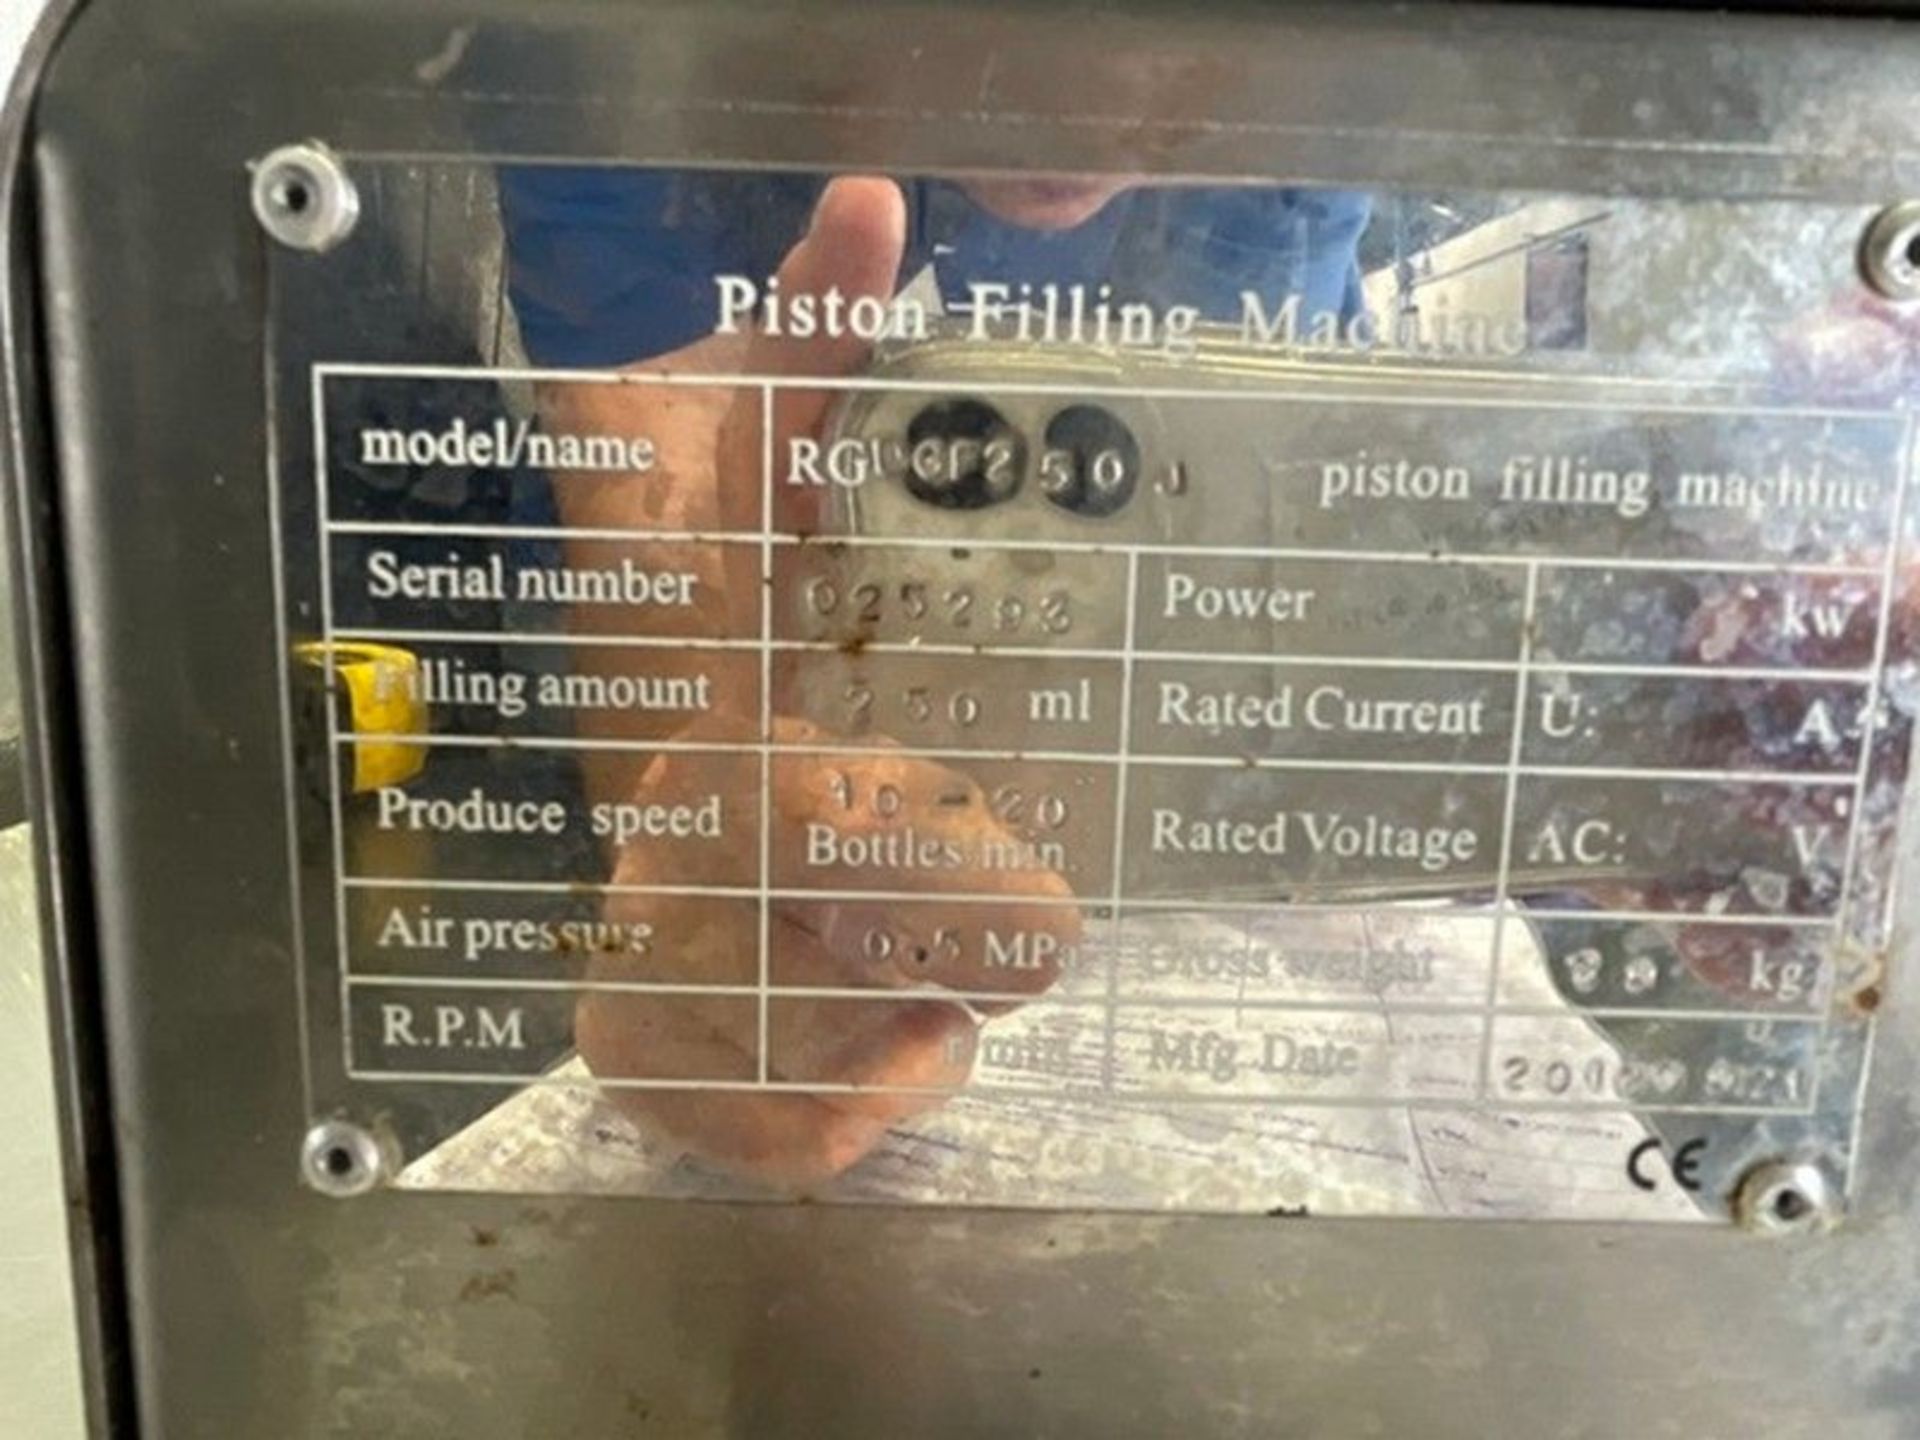 Resto Piston Filling Machine (NOTE: Formerly Filled 16 oz. Products) (Auction I.D. 63503186)( - Image 6 of 6